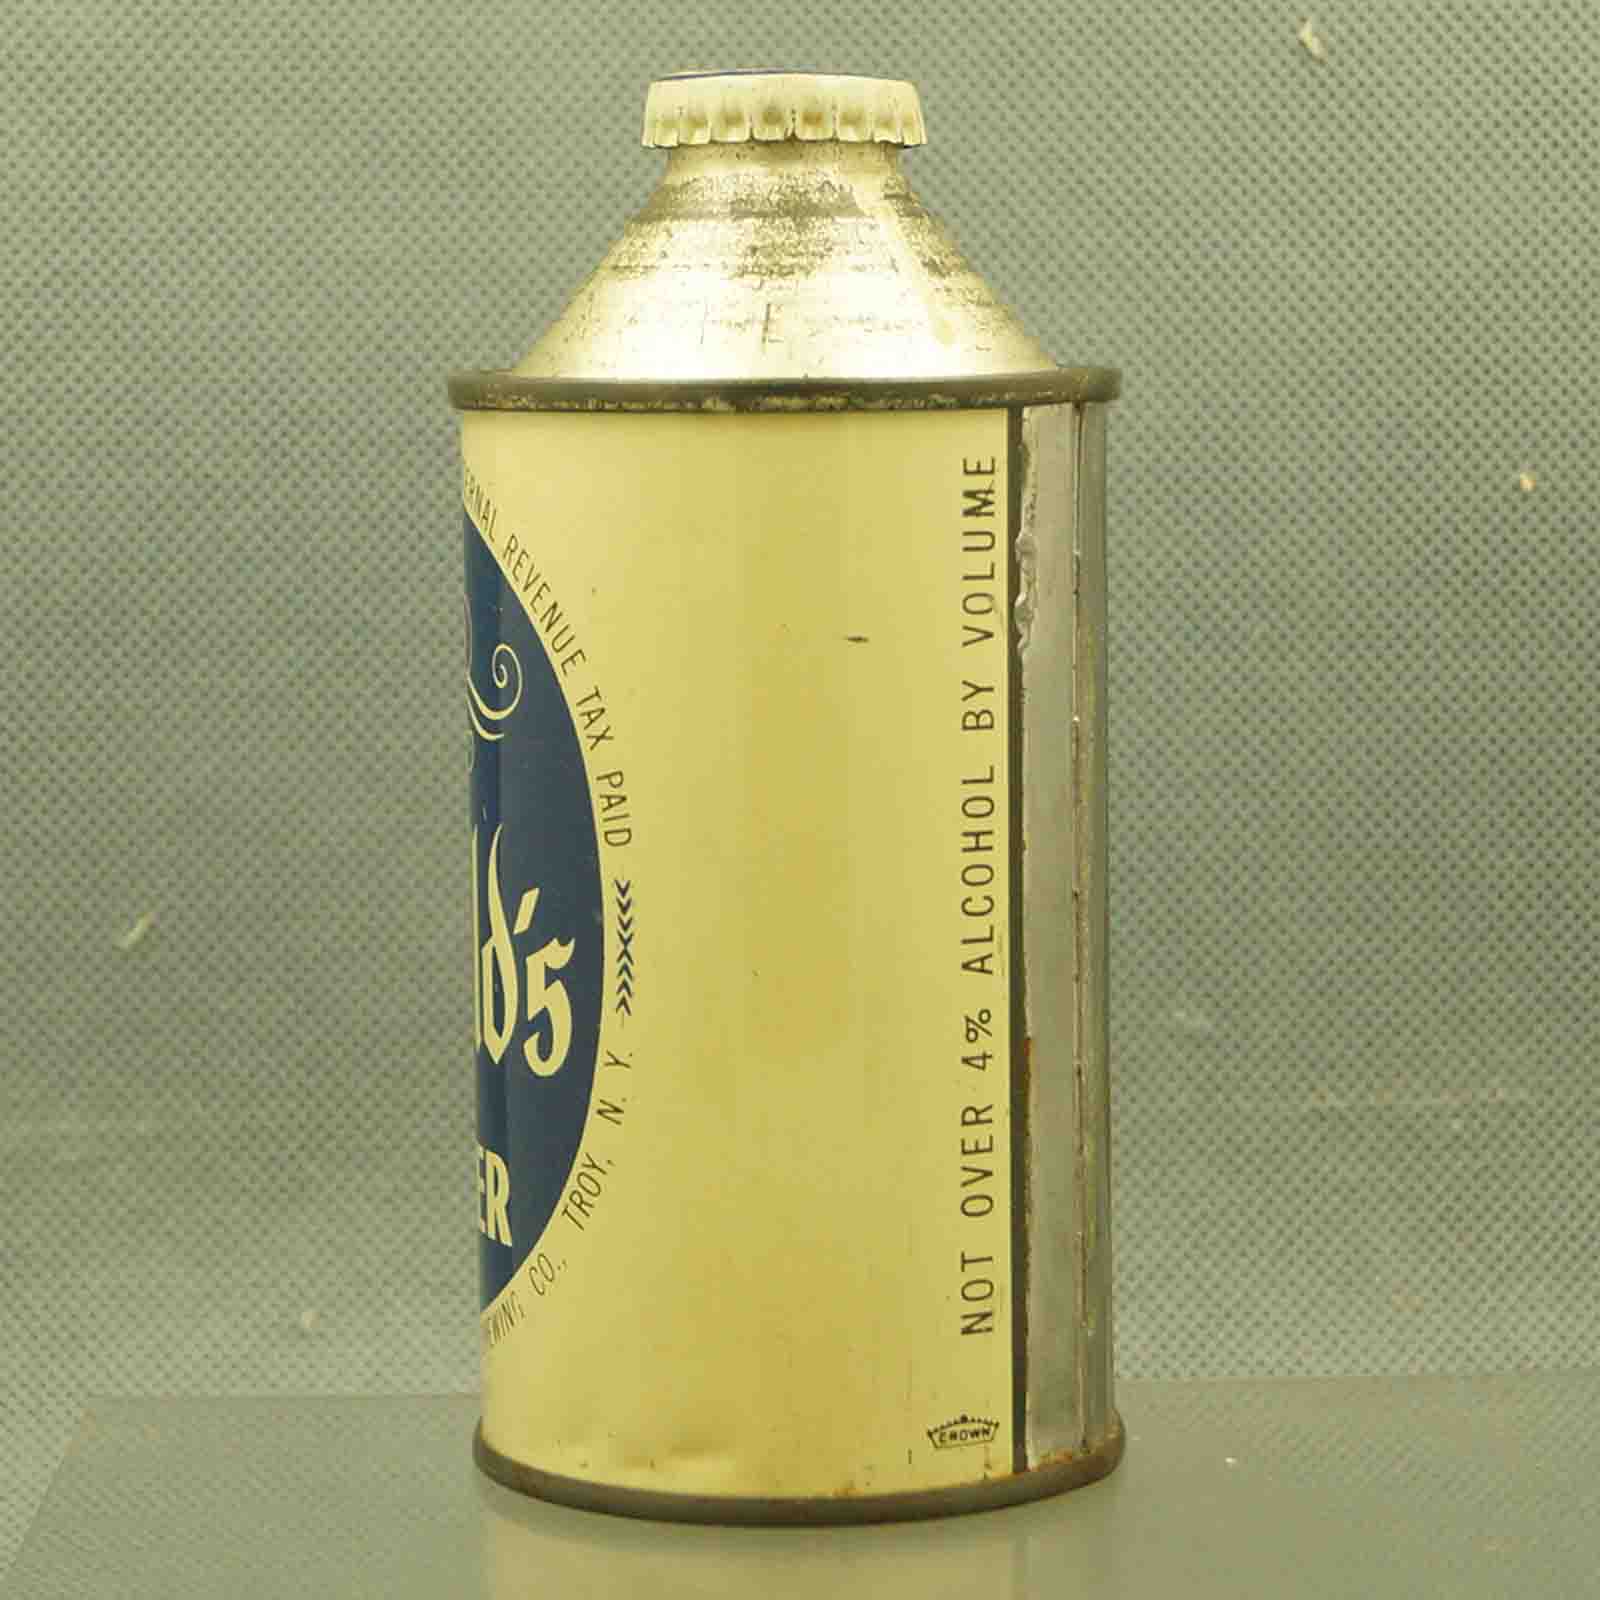 fitzgeralds 163-6 cone top beer can 2